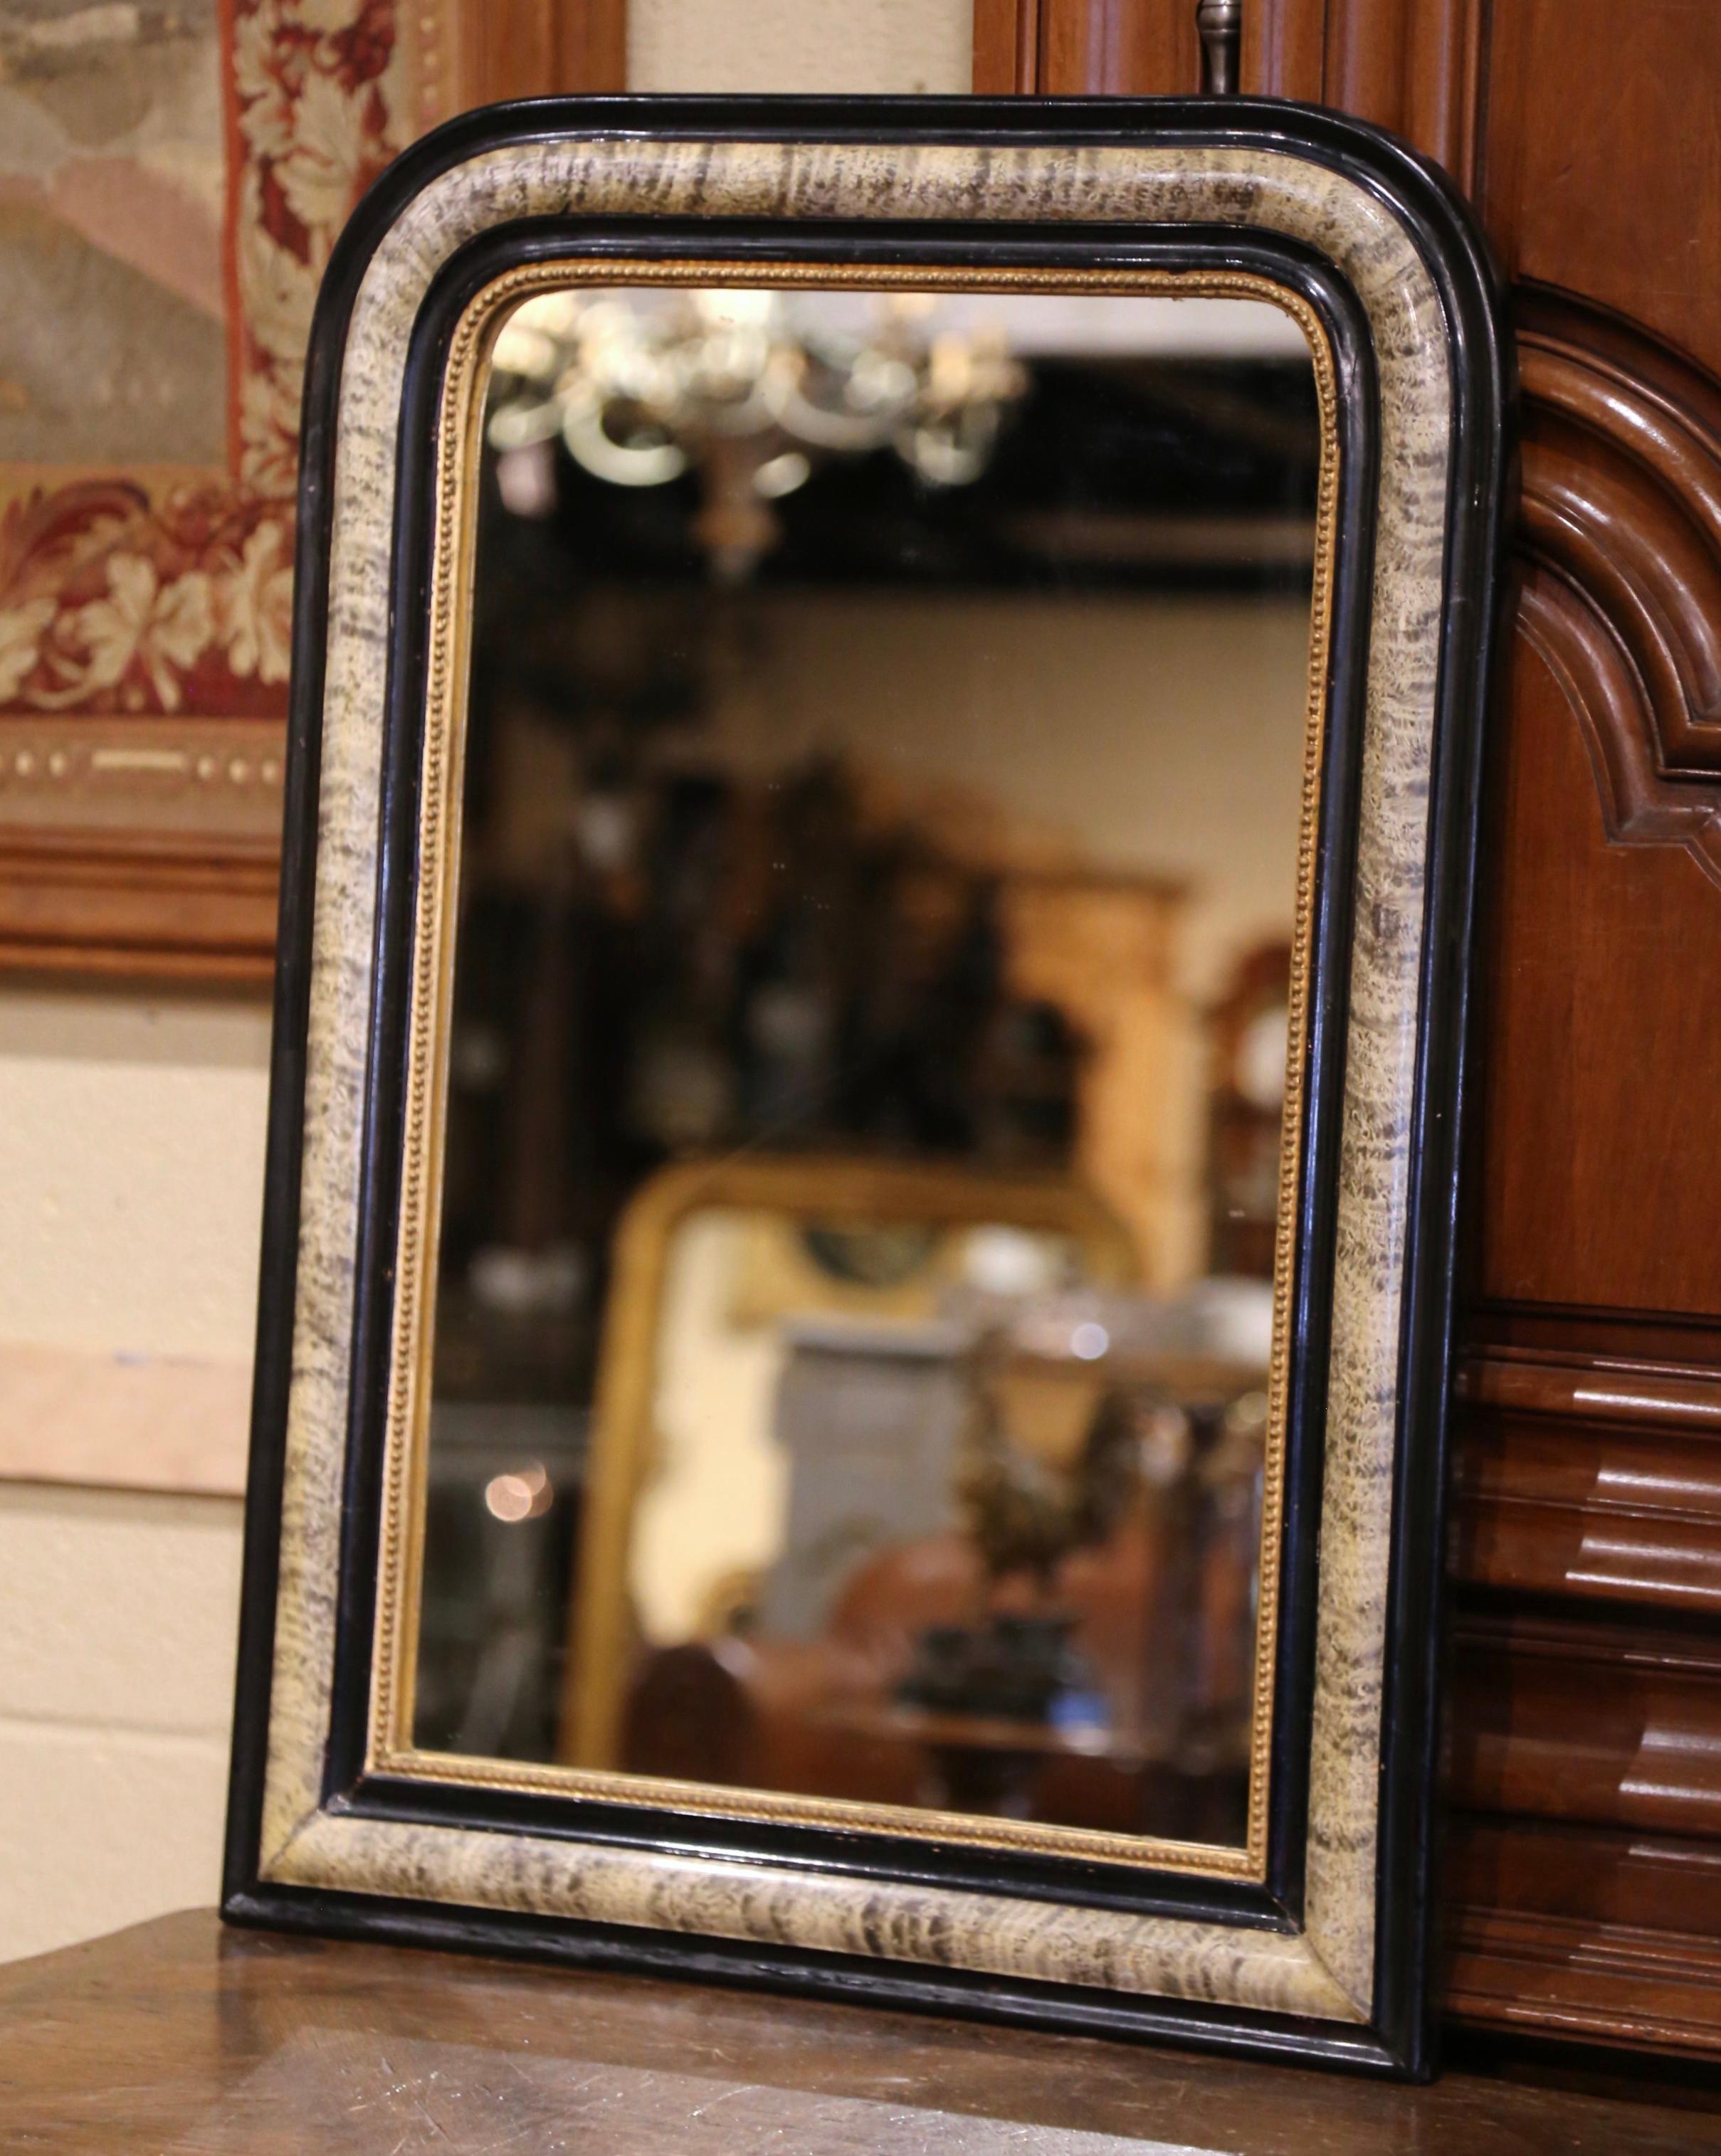 This elegant antique wall mirror was crafted in France, circa 1870. The frame is decorated with a Faux Bois painted decor in between patinated blackened paint finish; it is further embellished with carved beads around the inside edges. The